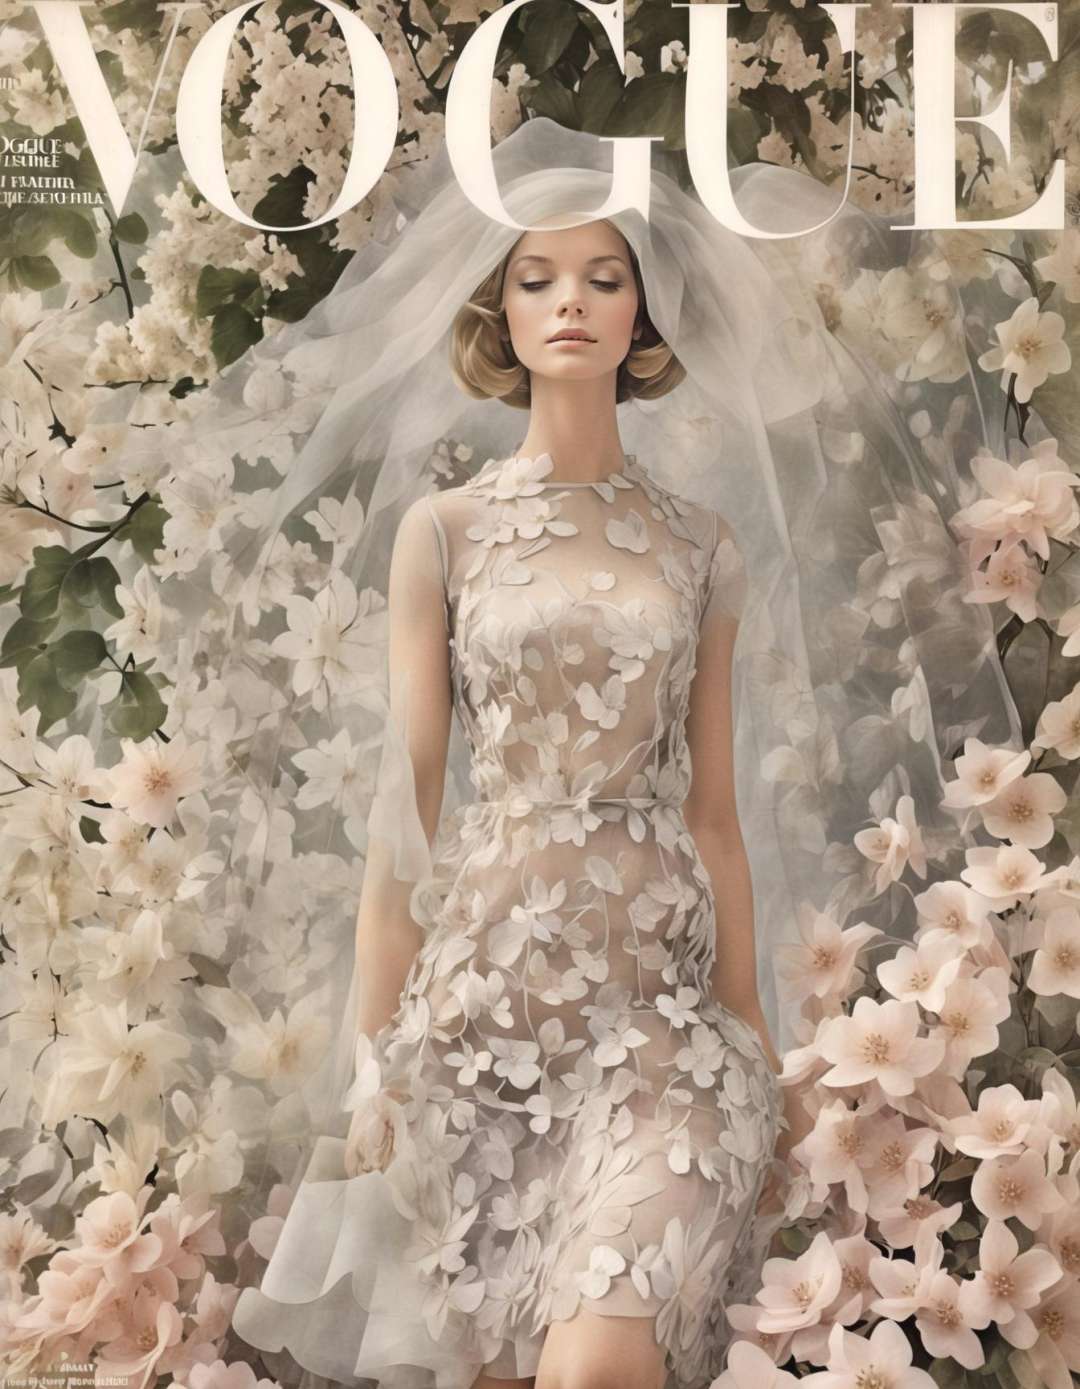 She translucent organza, floral delicacy, blooming petals, sheer elegance, garden party attire, femininity redefined, Marie Claire Editorial, botanical garden backdrop.,highly intricate,(VOGUE Cover Magazine:1.15),1968, 60s, black letters, hyper detailed, photorealistic,,